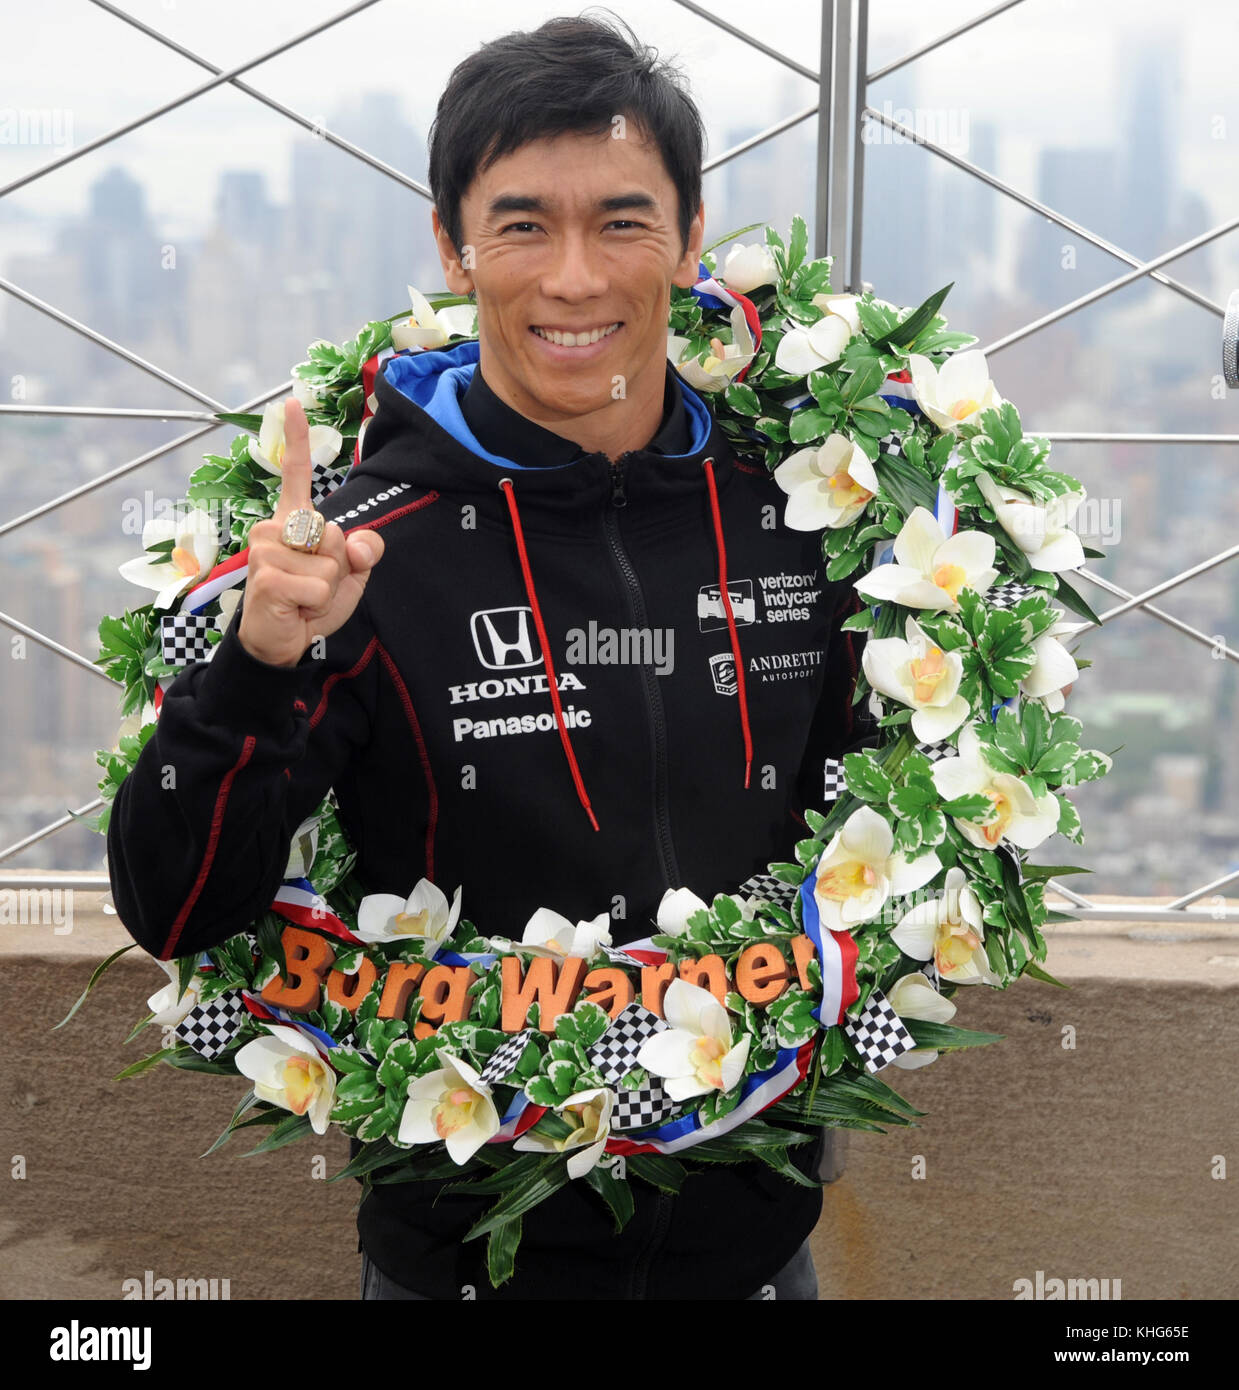 NEW YORK, NY - MAY 30: Indy driver Takuma Sato at The Empire State Building. Takuma Sato, winner of the 101st running of the Indianapolis 500 and driver of the #26 Ruoff Home Mortgage Honda, will visit the Empire State Building following his victory in Sunday’s historic race. Sato became the first Japanese driver to win “The Greatest Spectacle in Racing” when he edged three-time Indy 500 winner Helio Castroneves to the finish line by 0.2011 of a second. His victory marked the fifth overall and second consecutive Indy 500 win for Andretti Autosport on May 30, 2017 in New York City.    People:   Stock Photo